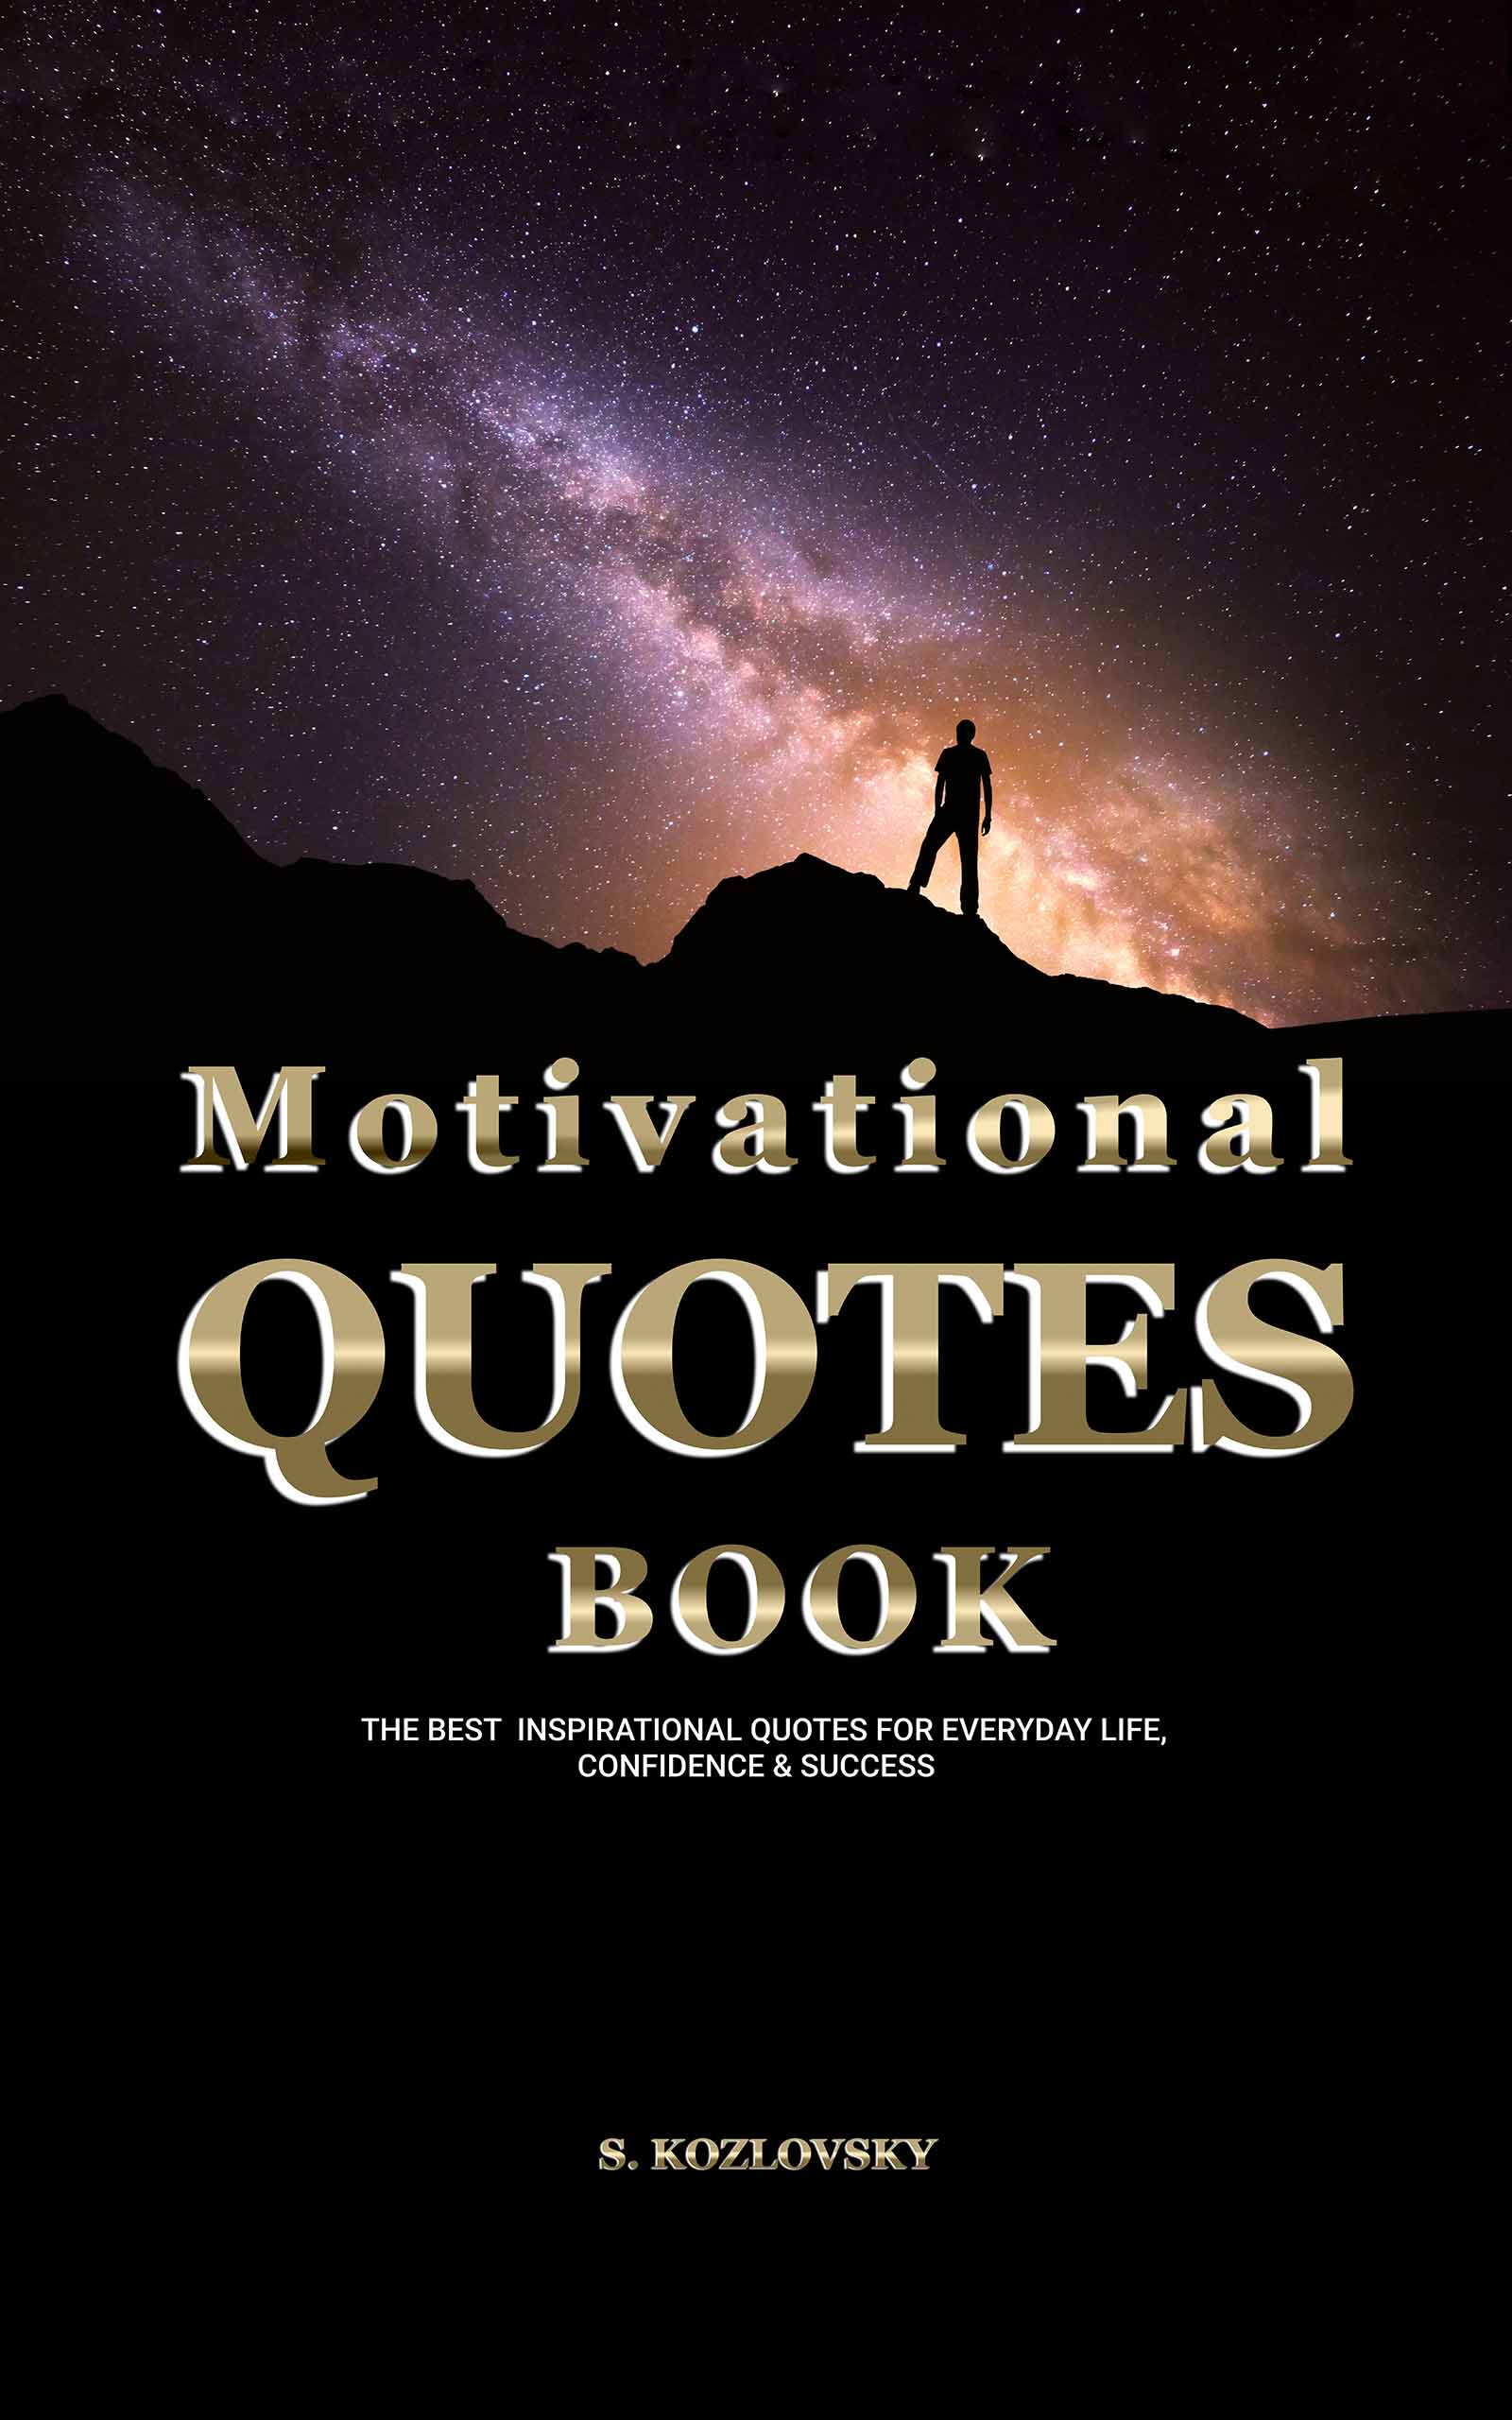 FREE: Motivational Quotes Book: The Best Inspirational Quotes for Everyday Life, Confidence & Success by Serge Kozlovsky